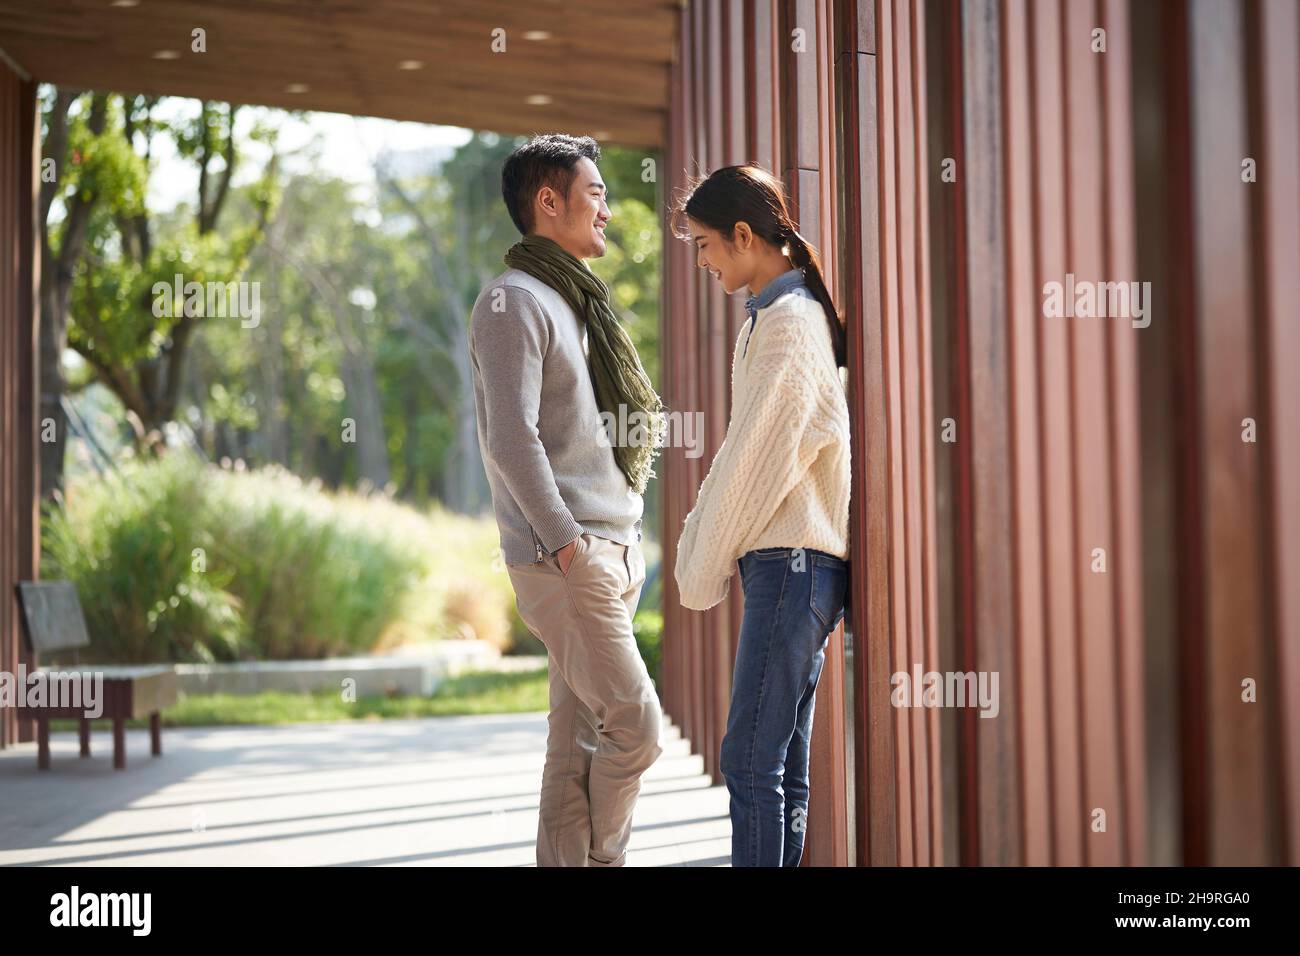 dating young asian couple talking chatting outdoors in city park Stock Photo